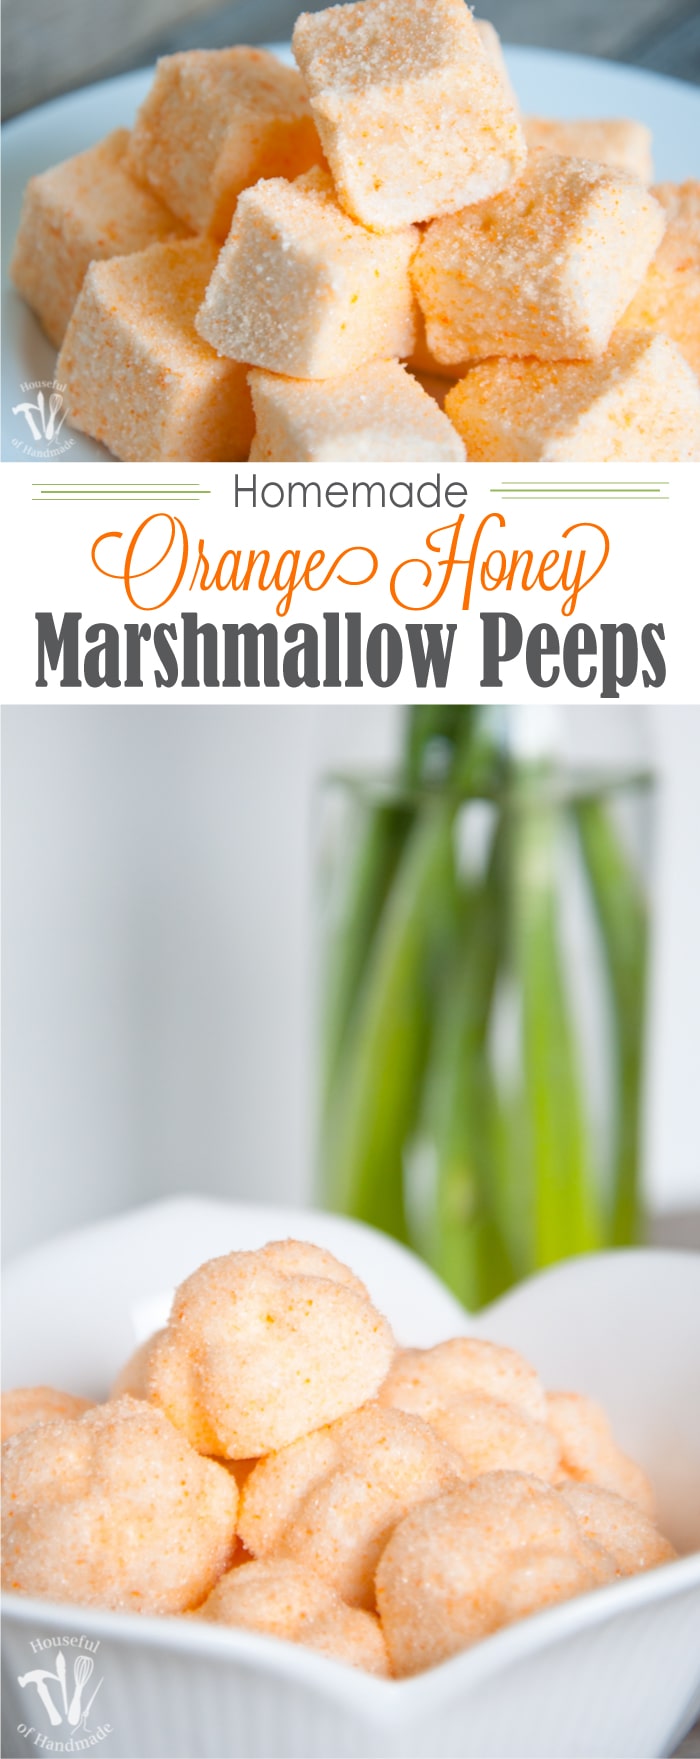 Who says Peeps are only for Easter? Celebrate spring with these delicious Homemade Orange Honey Marshmallow Peeps. These fancier homemade marshmallows are the perfect spring treat. | Housefulofhandmade.com